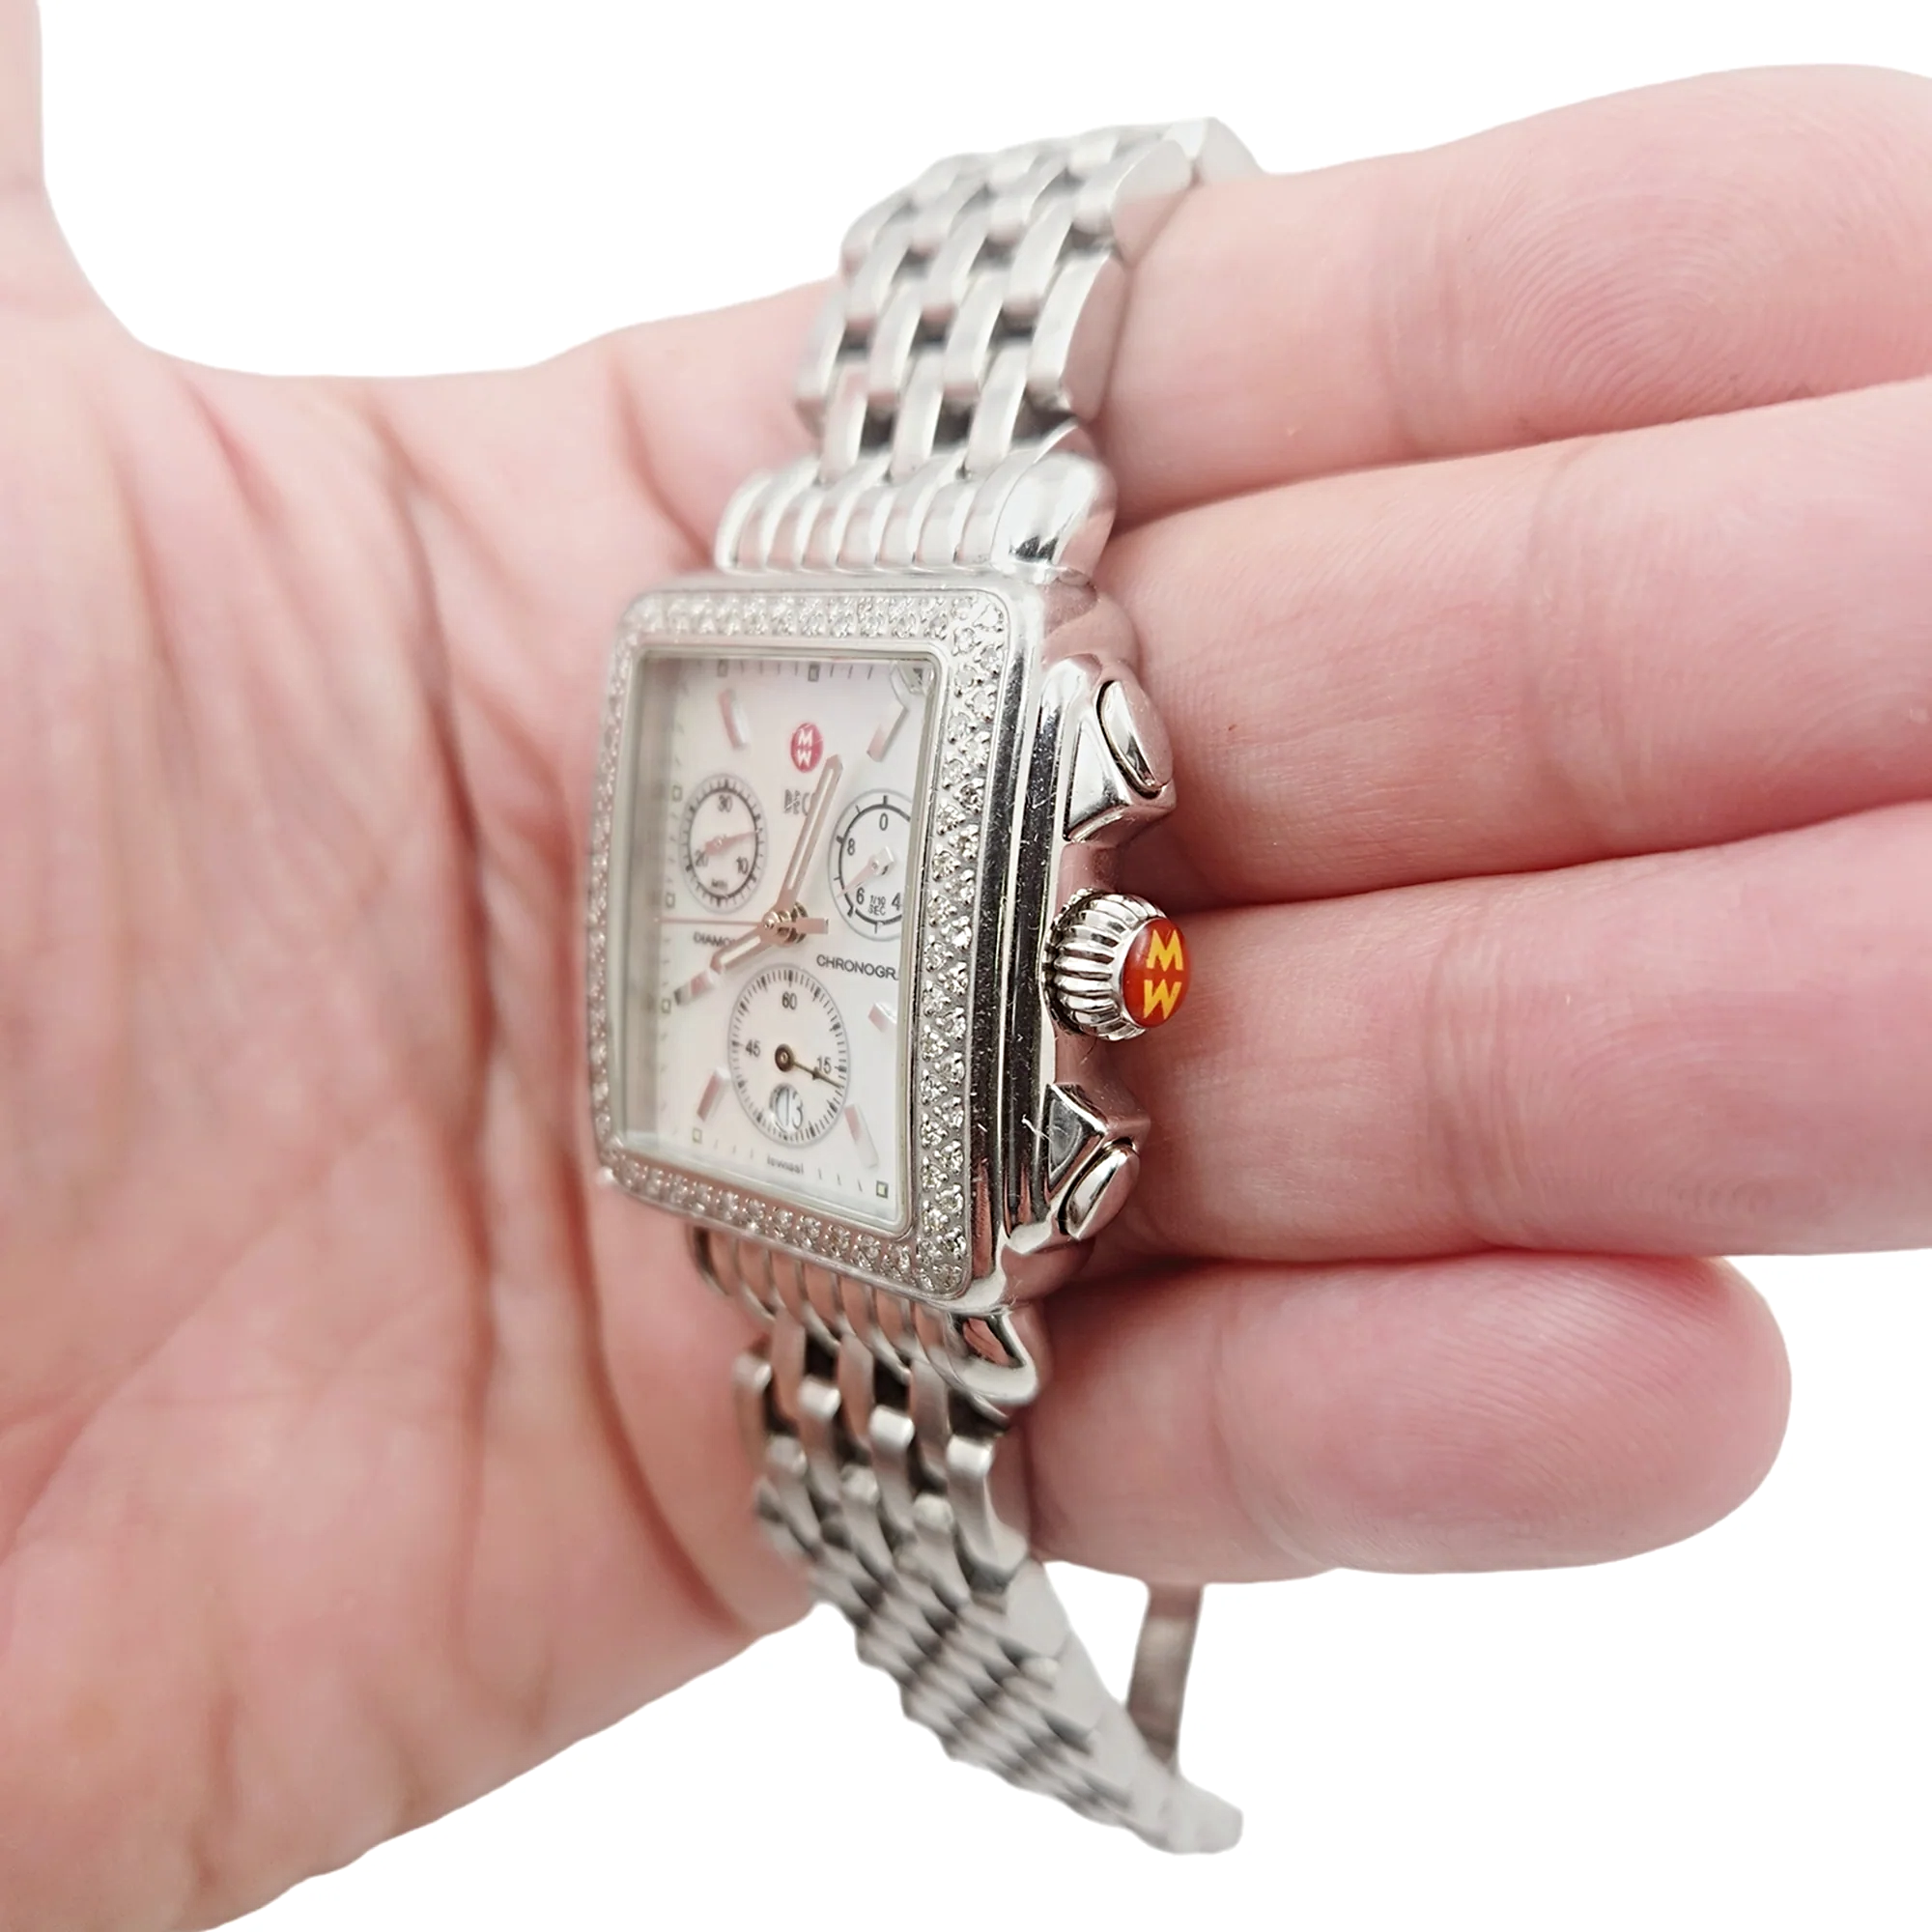 Ladies Michele Deco 33mm Stainless Steel Watch with Mother of Pearl Chronograph Dial and Diamond Bezel. (Pre-Owned MW06A01)